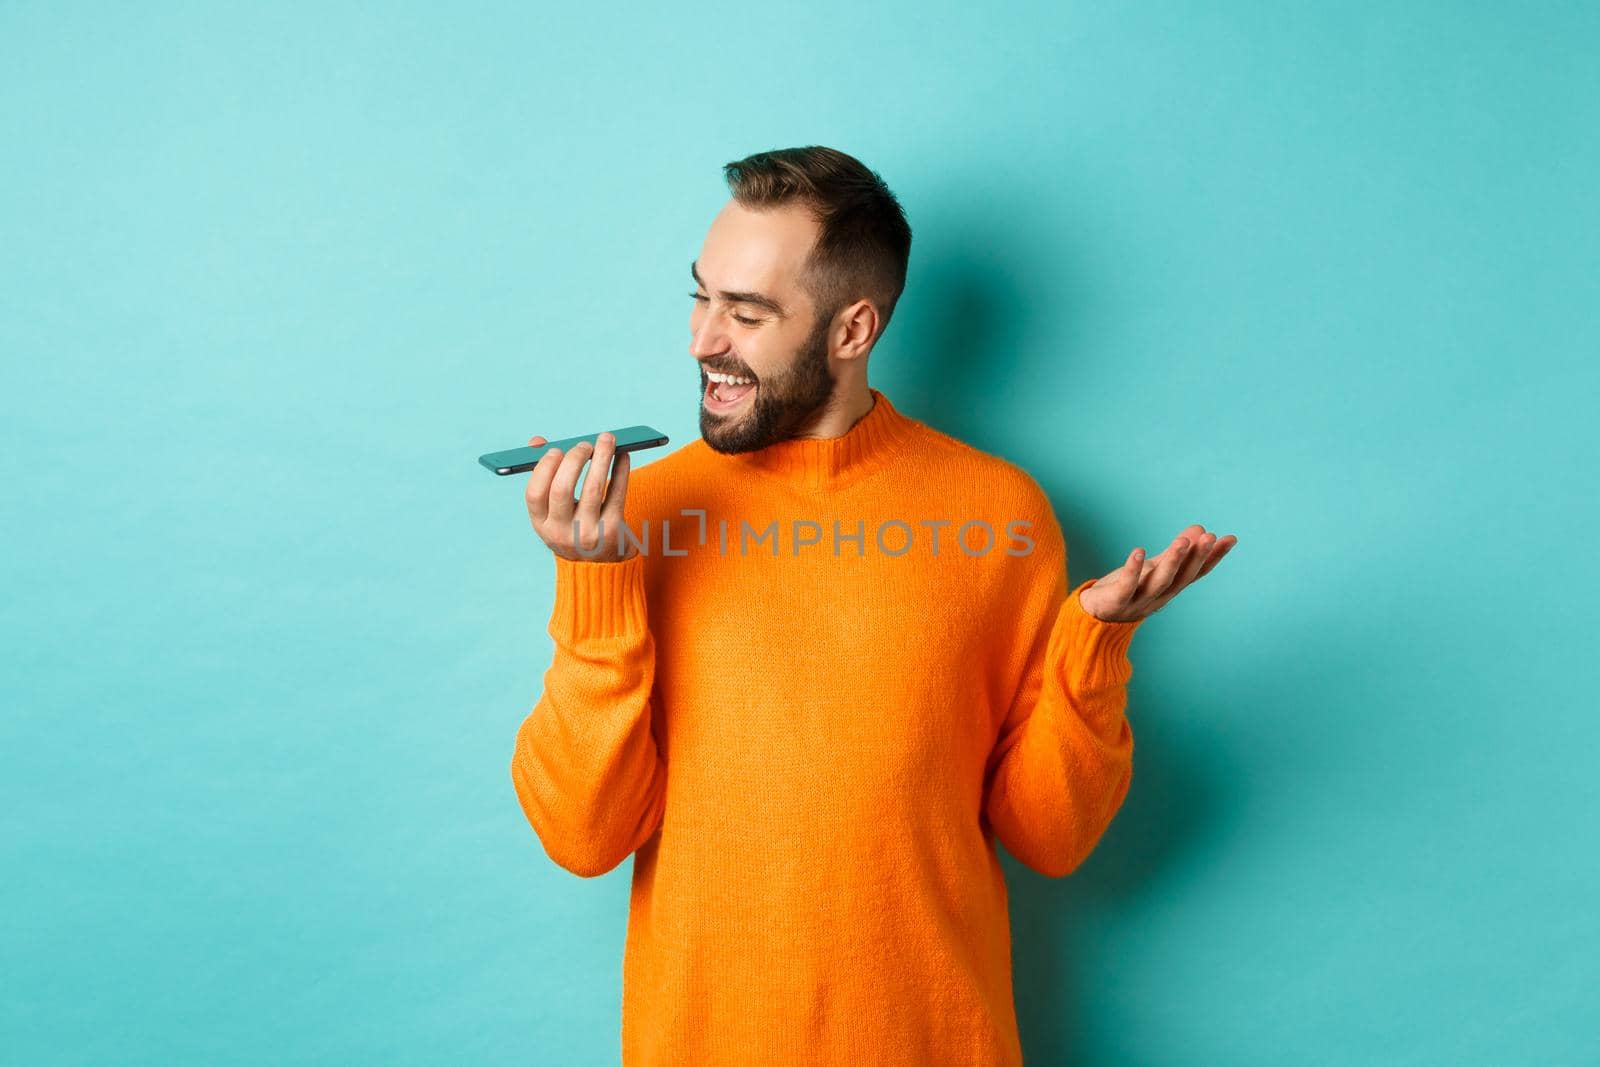 Happy man talking on speakerphone, gesturing and recording voice message on mobile phone, standing in orange sweater over light blue background.